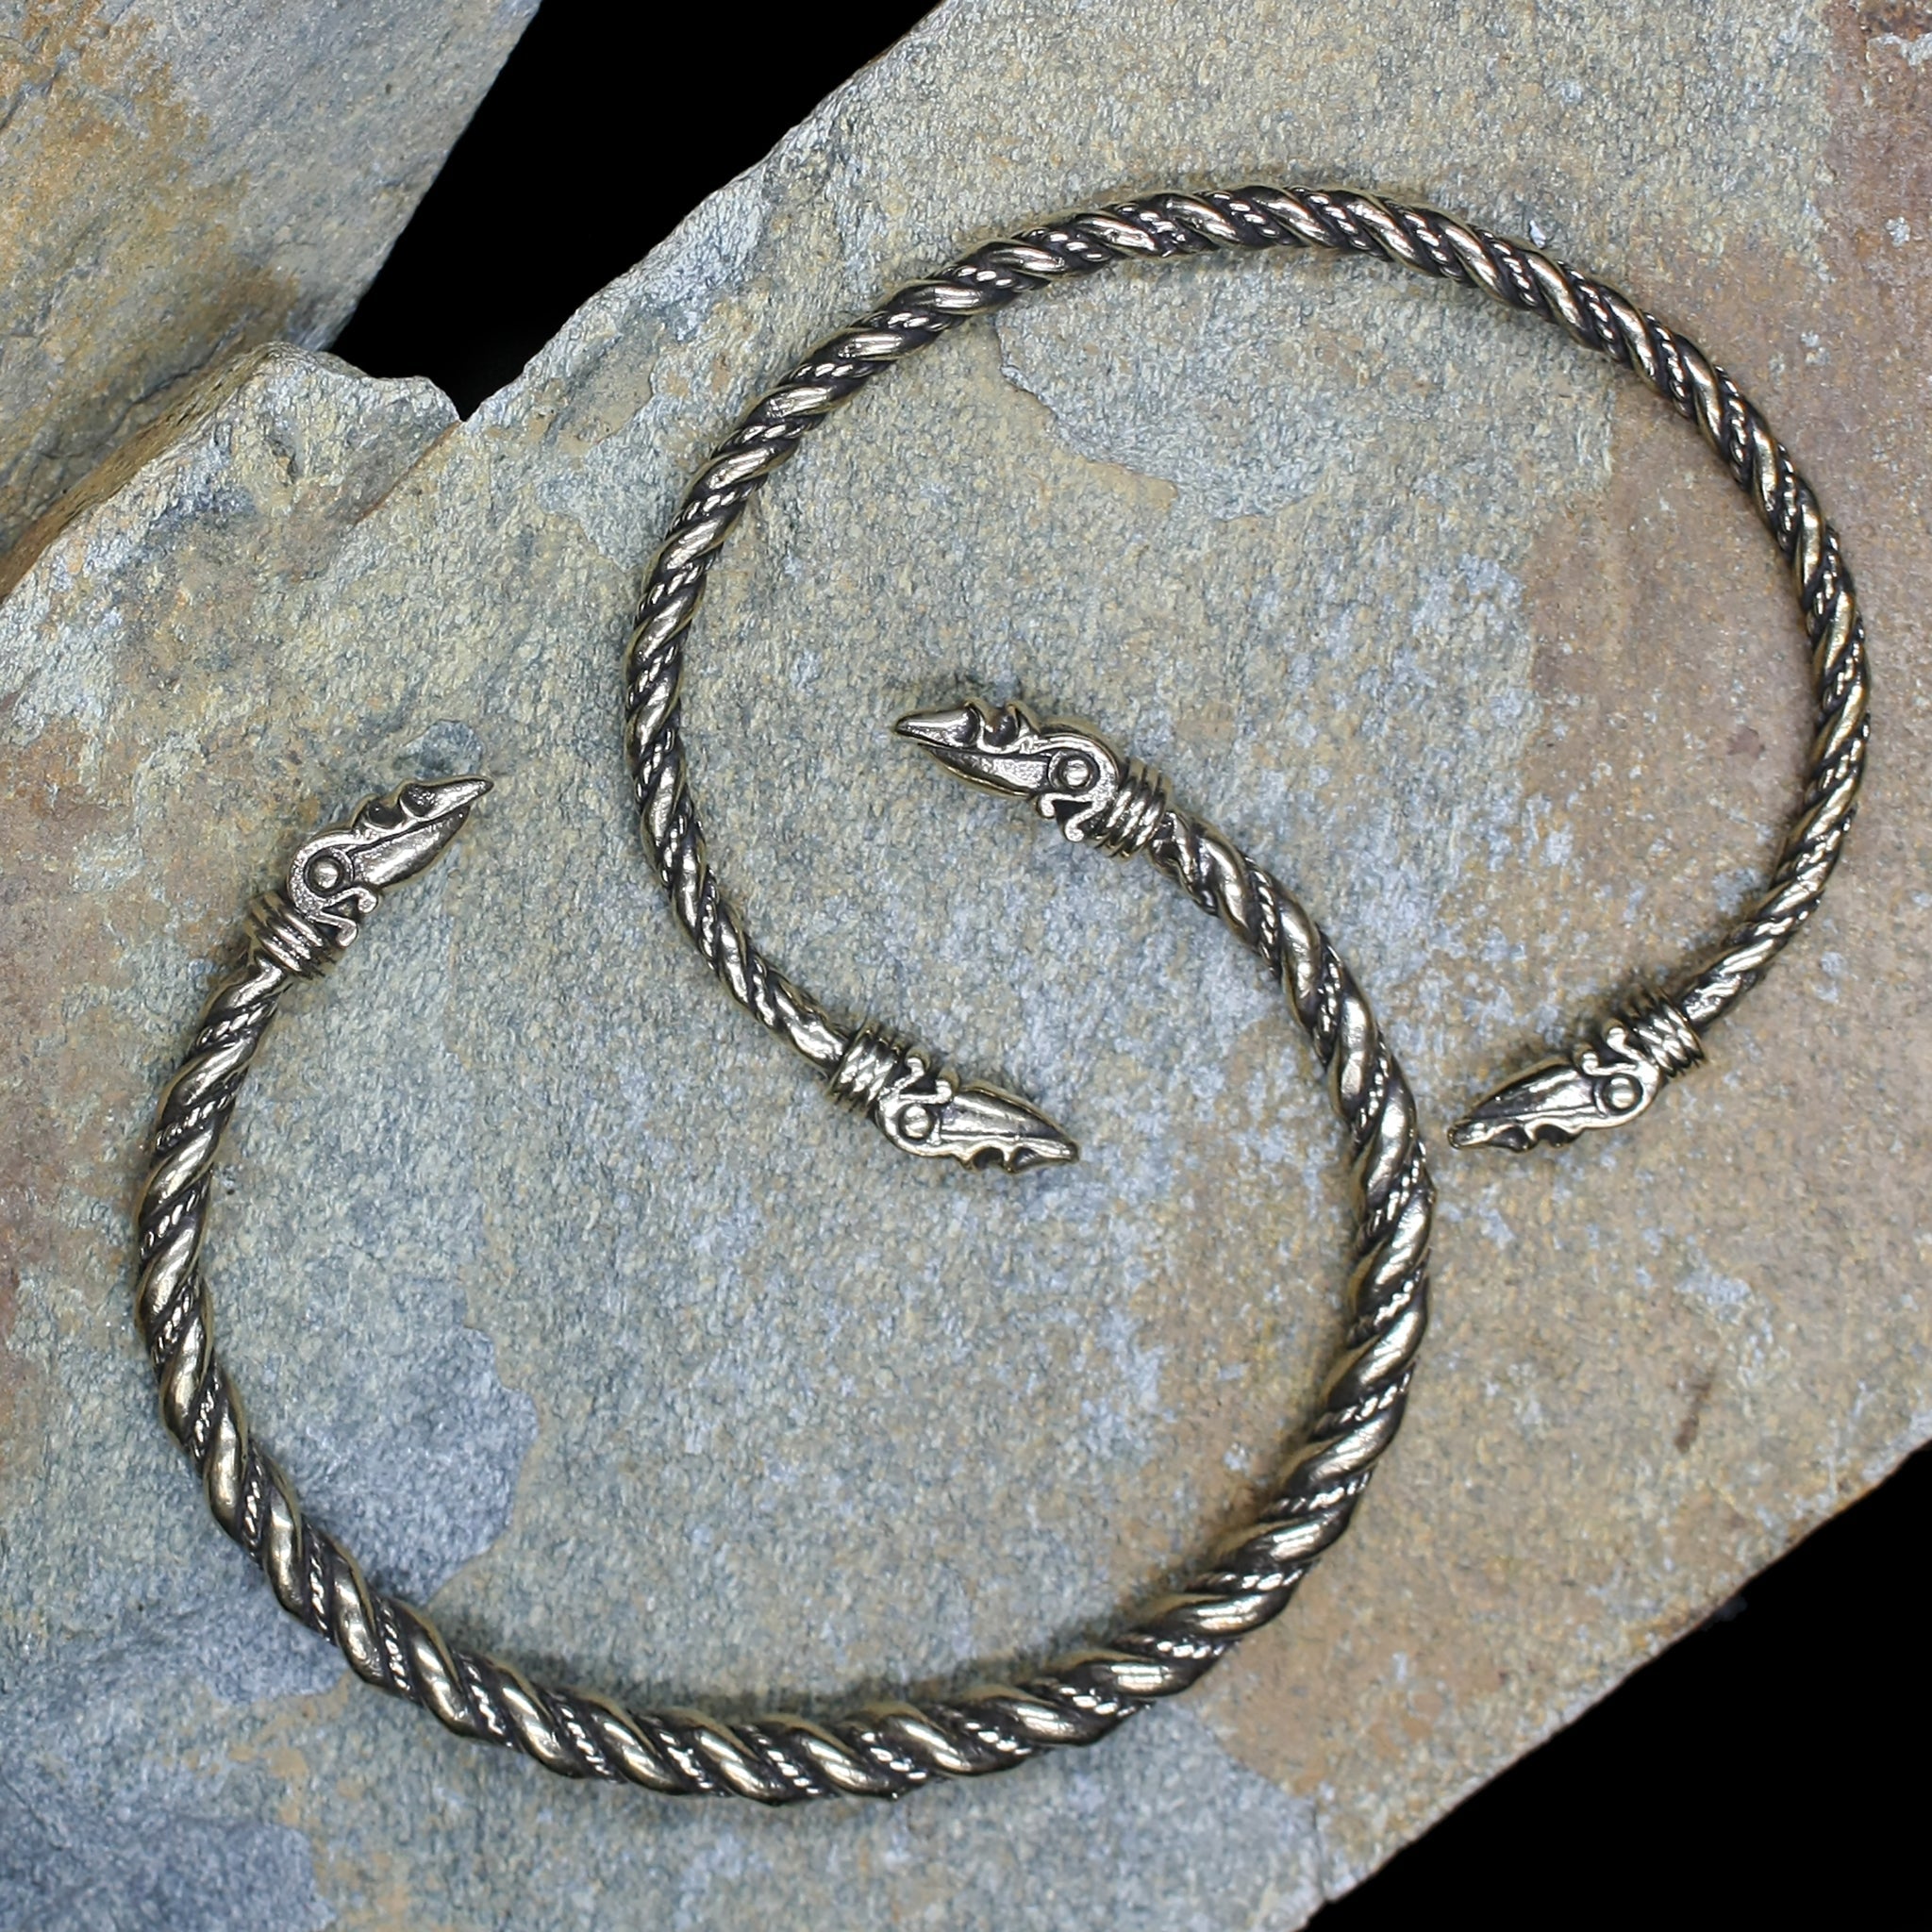 Twisted Bronze Bracelet With Raven Heads on Rock